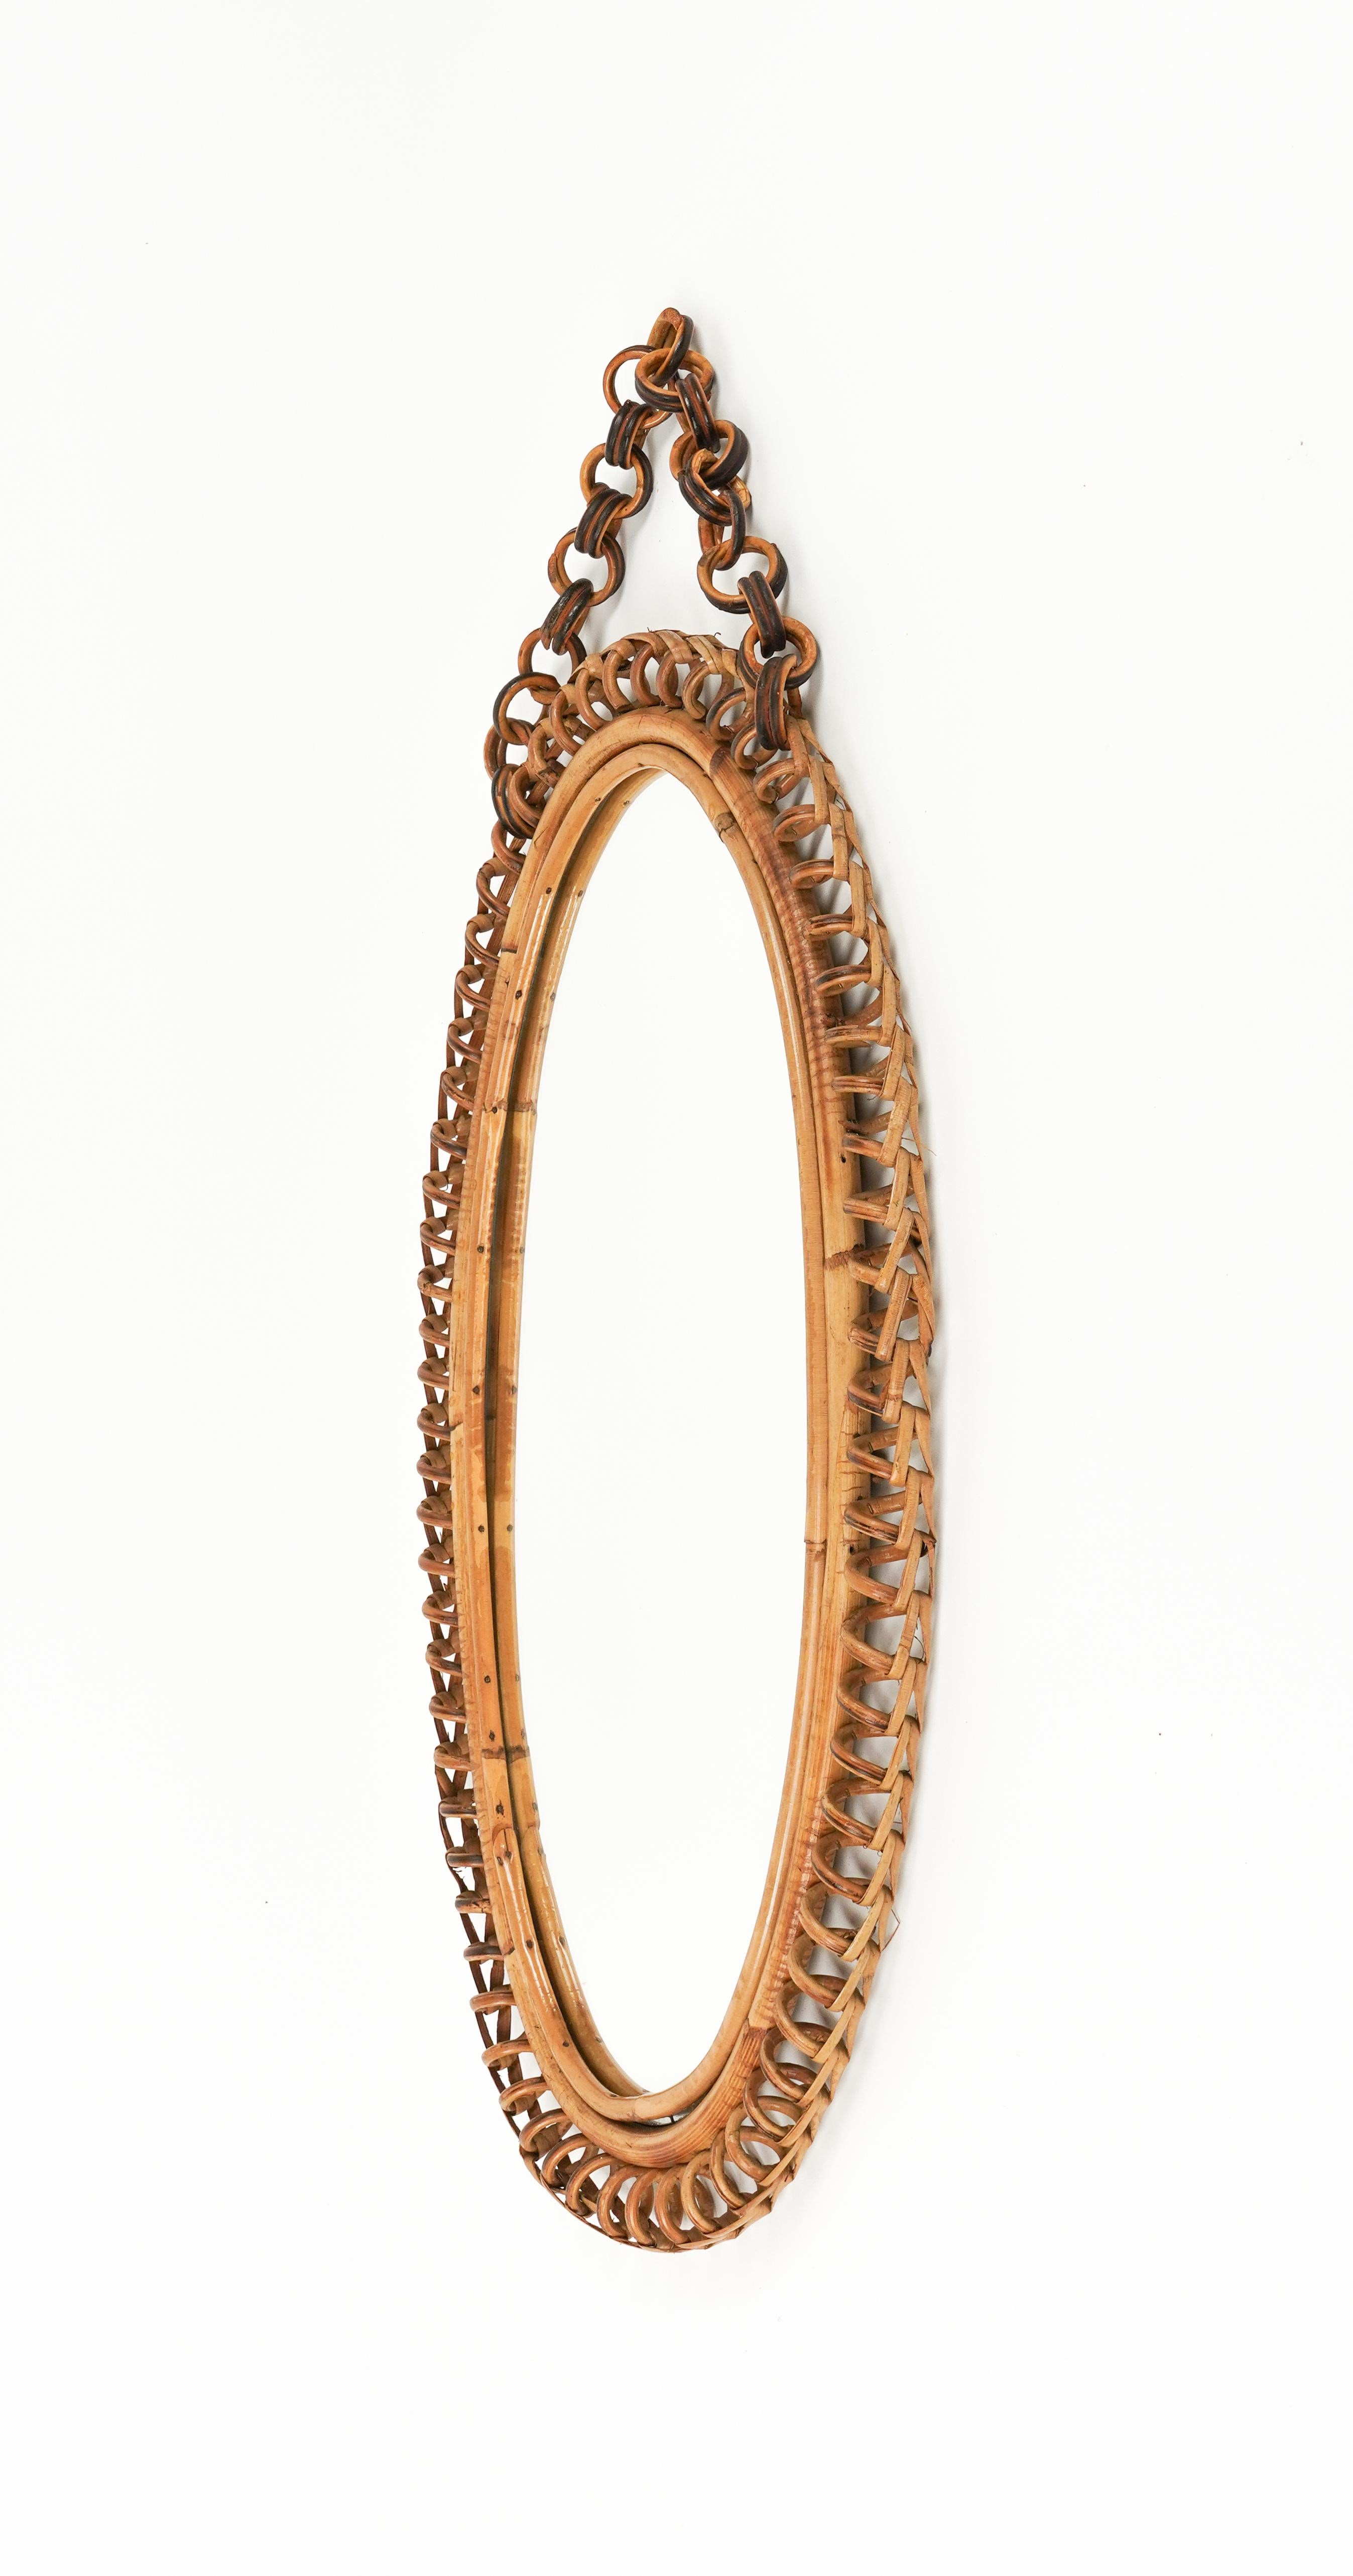 Midcentury Rattan & Bamboo Oval Wall Mirror with Chain, Italy 1960s For Sale 2